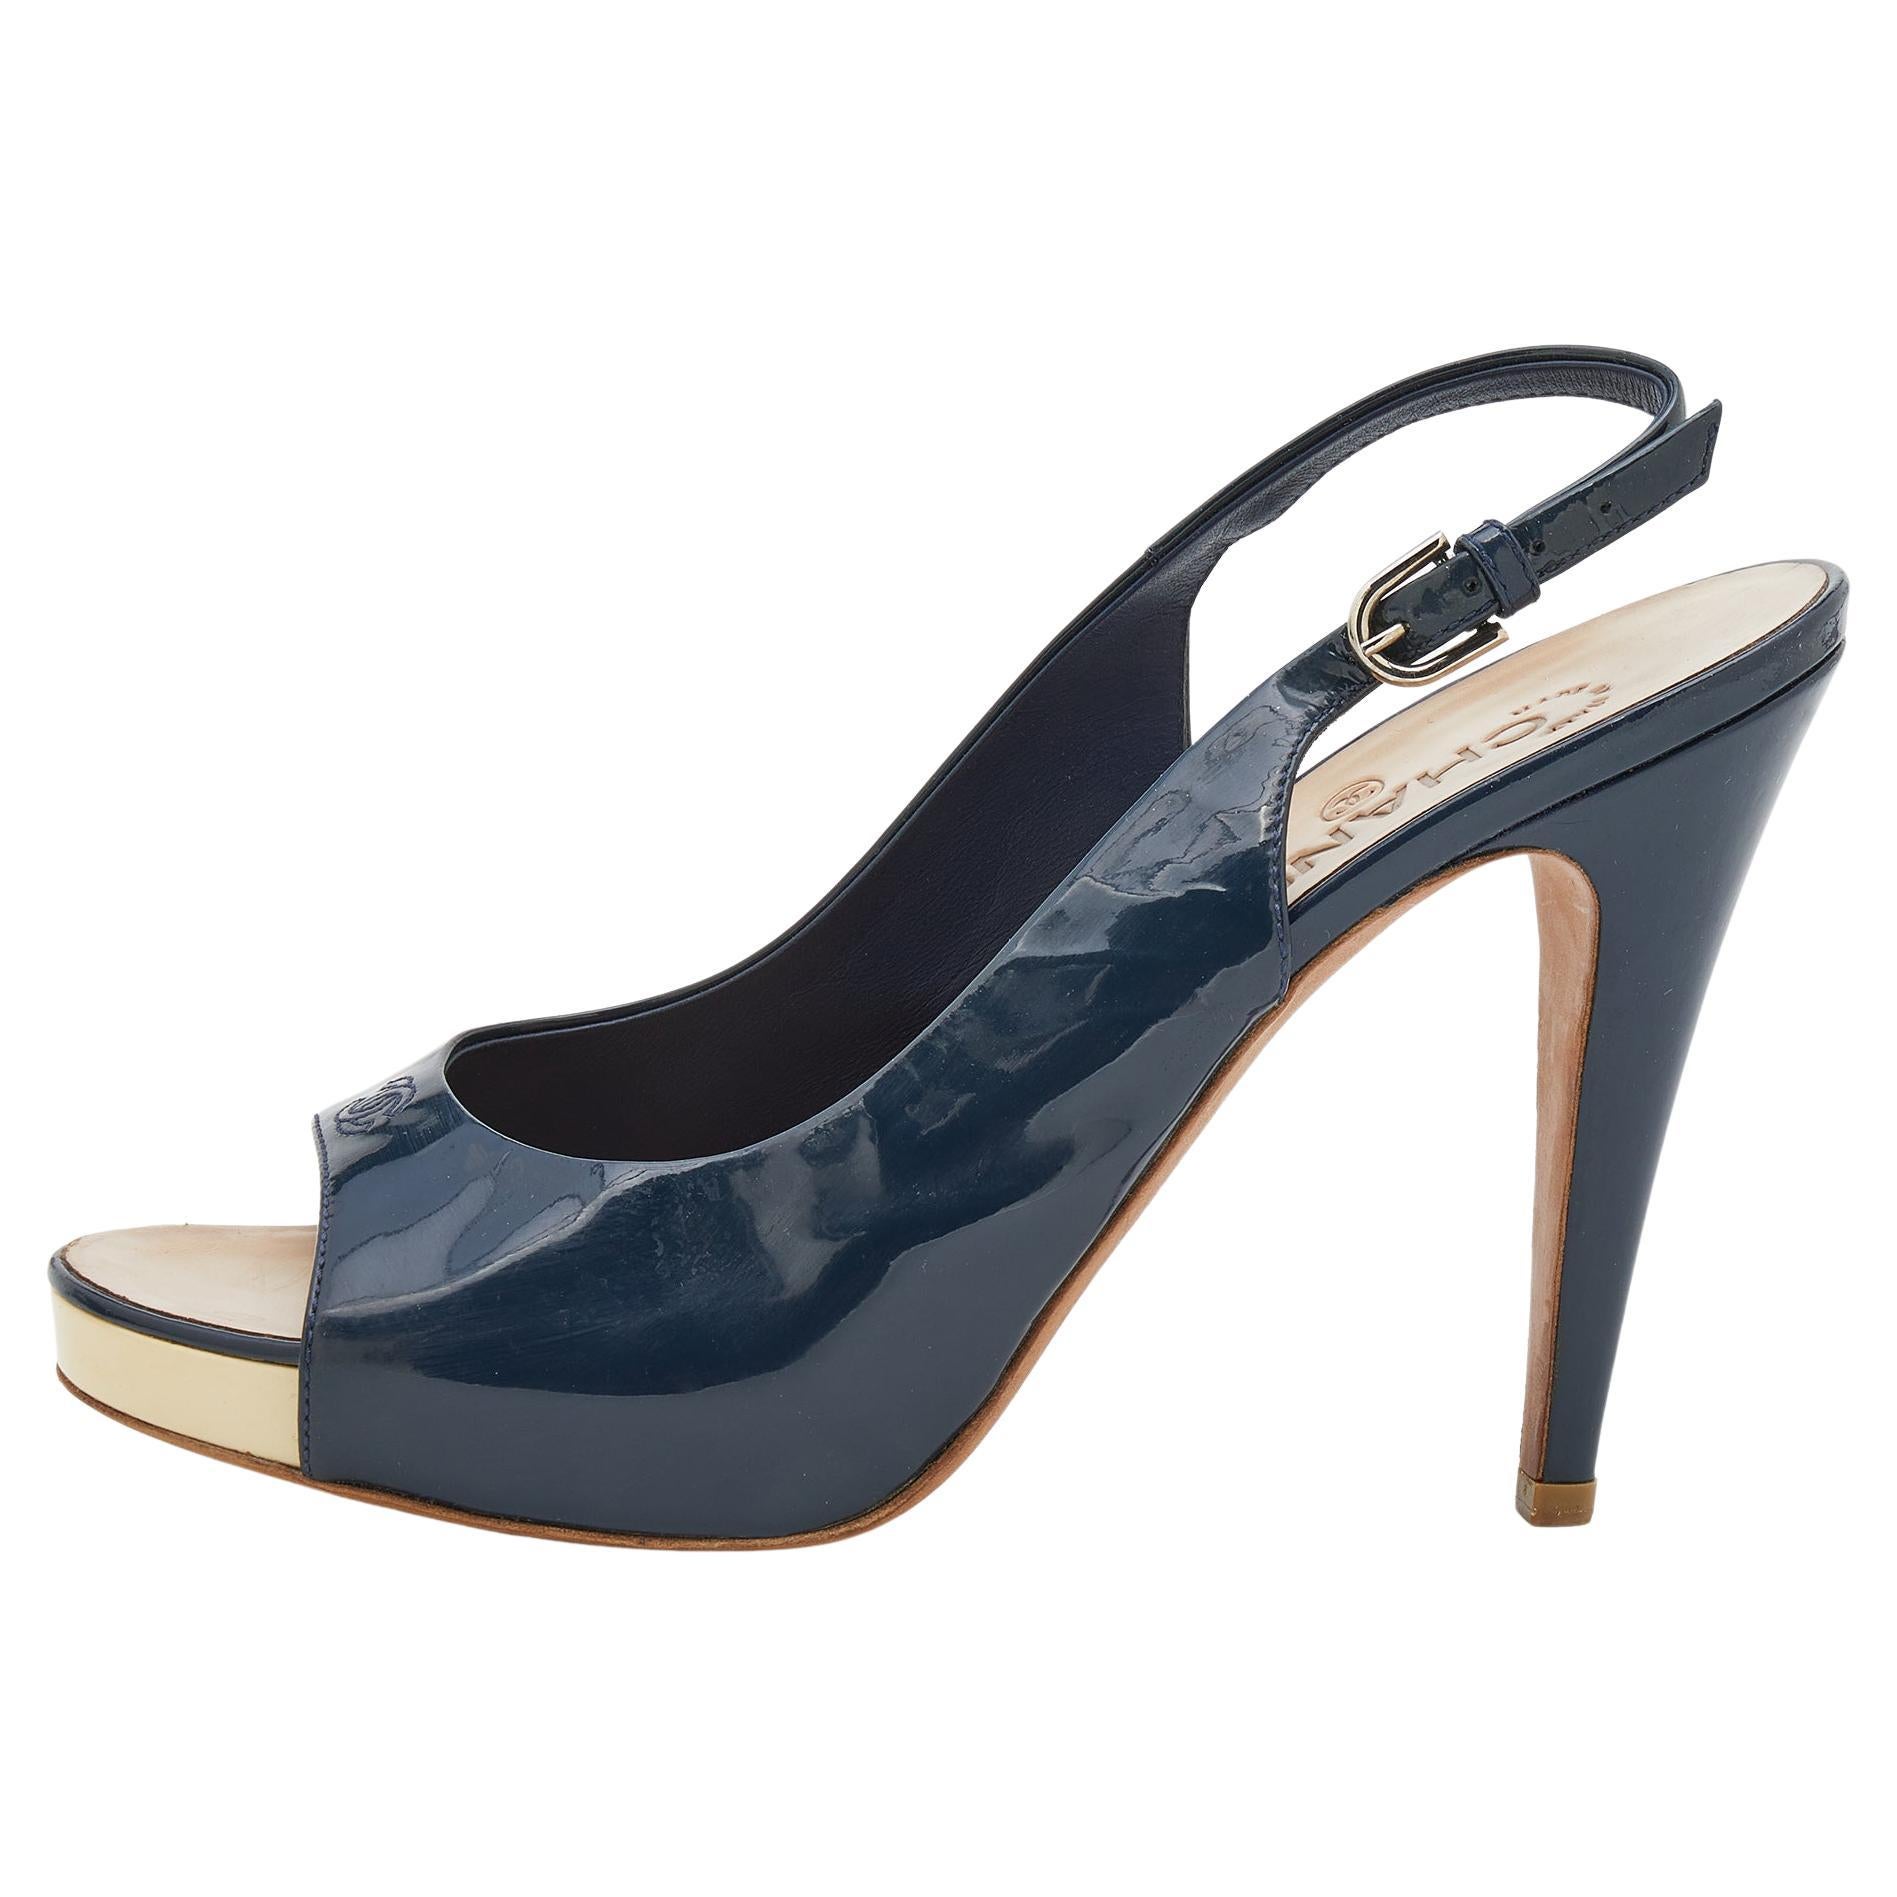 Chanel Blue Leather And Black Canvas CC Cap Toe Slingback Sandals